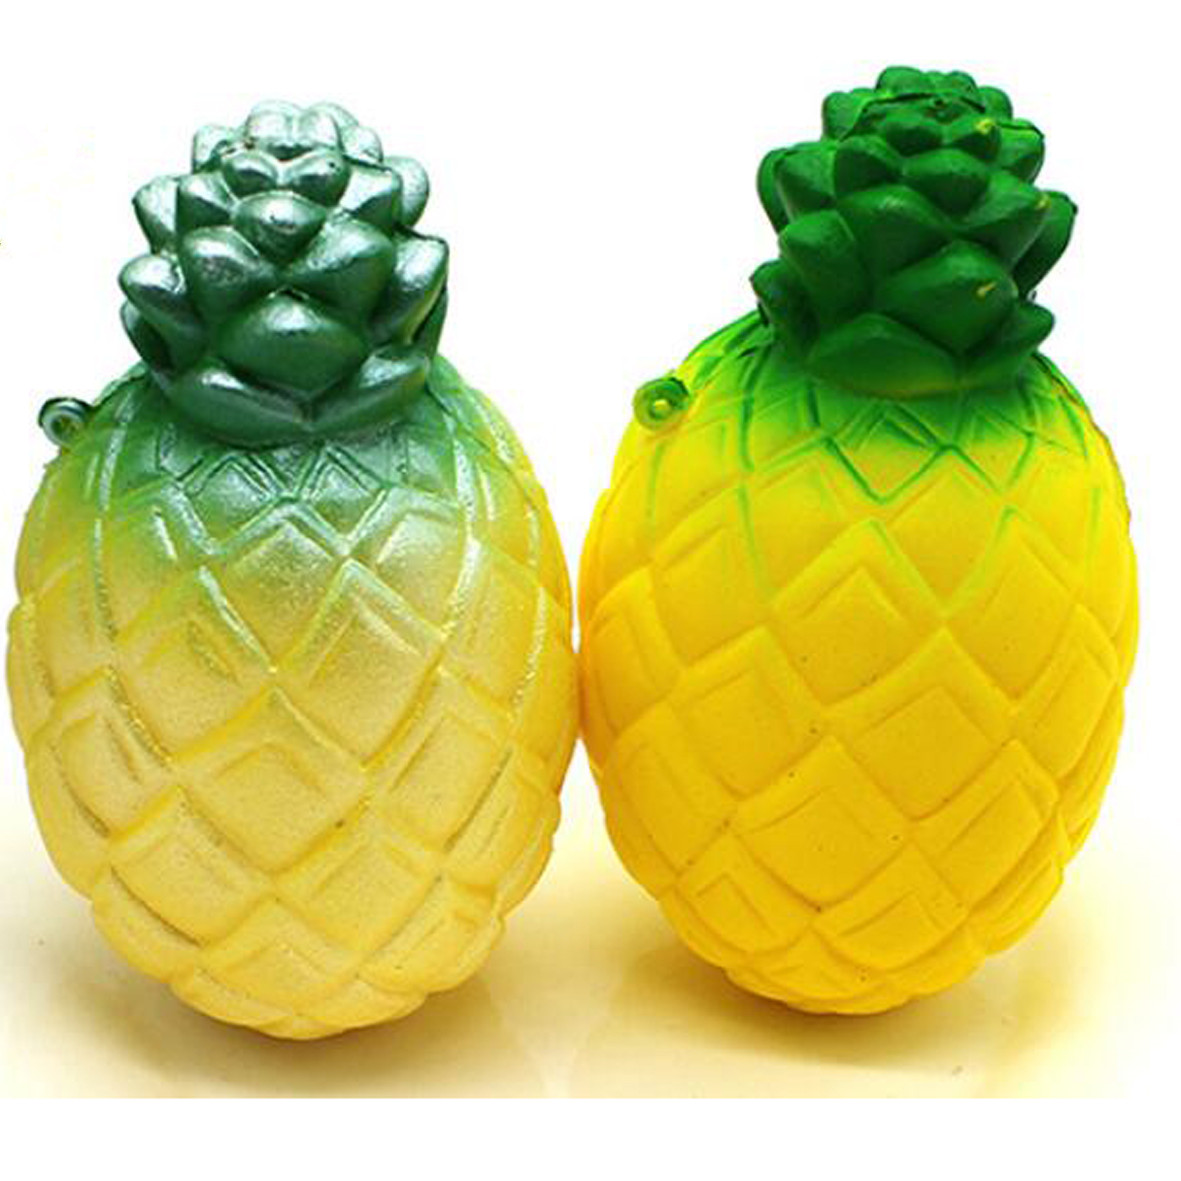 GL-ELY1203 Pineapple Shaped Squishy Toy